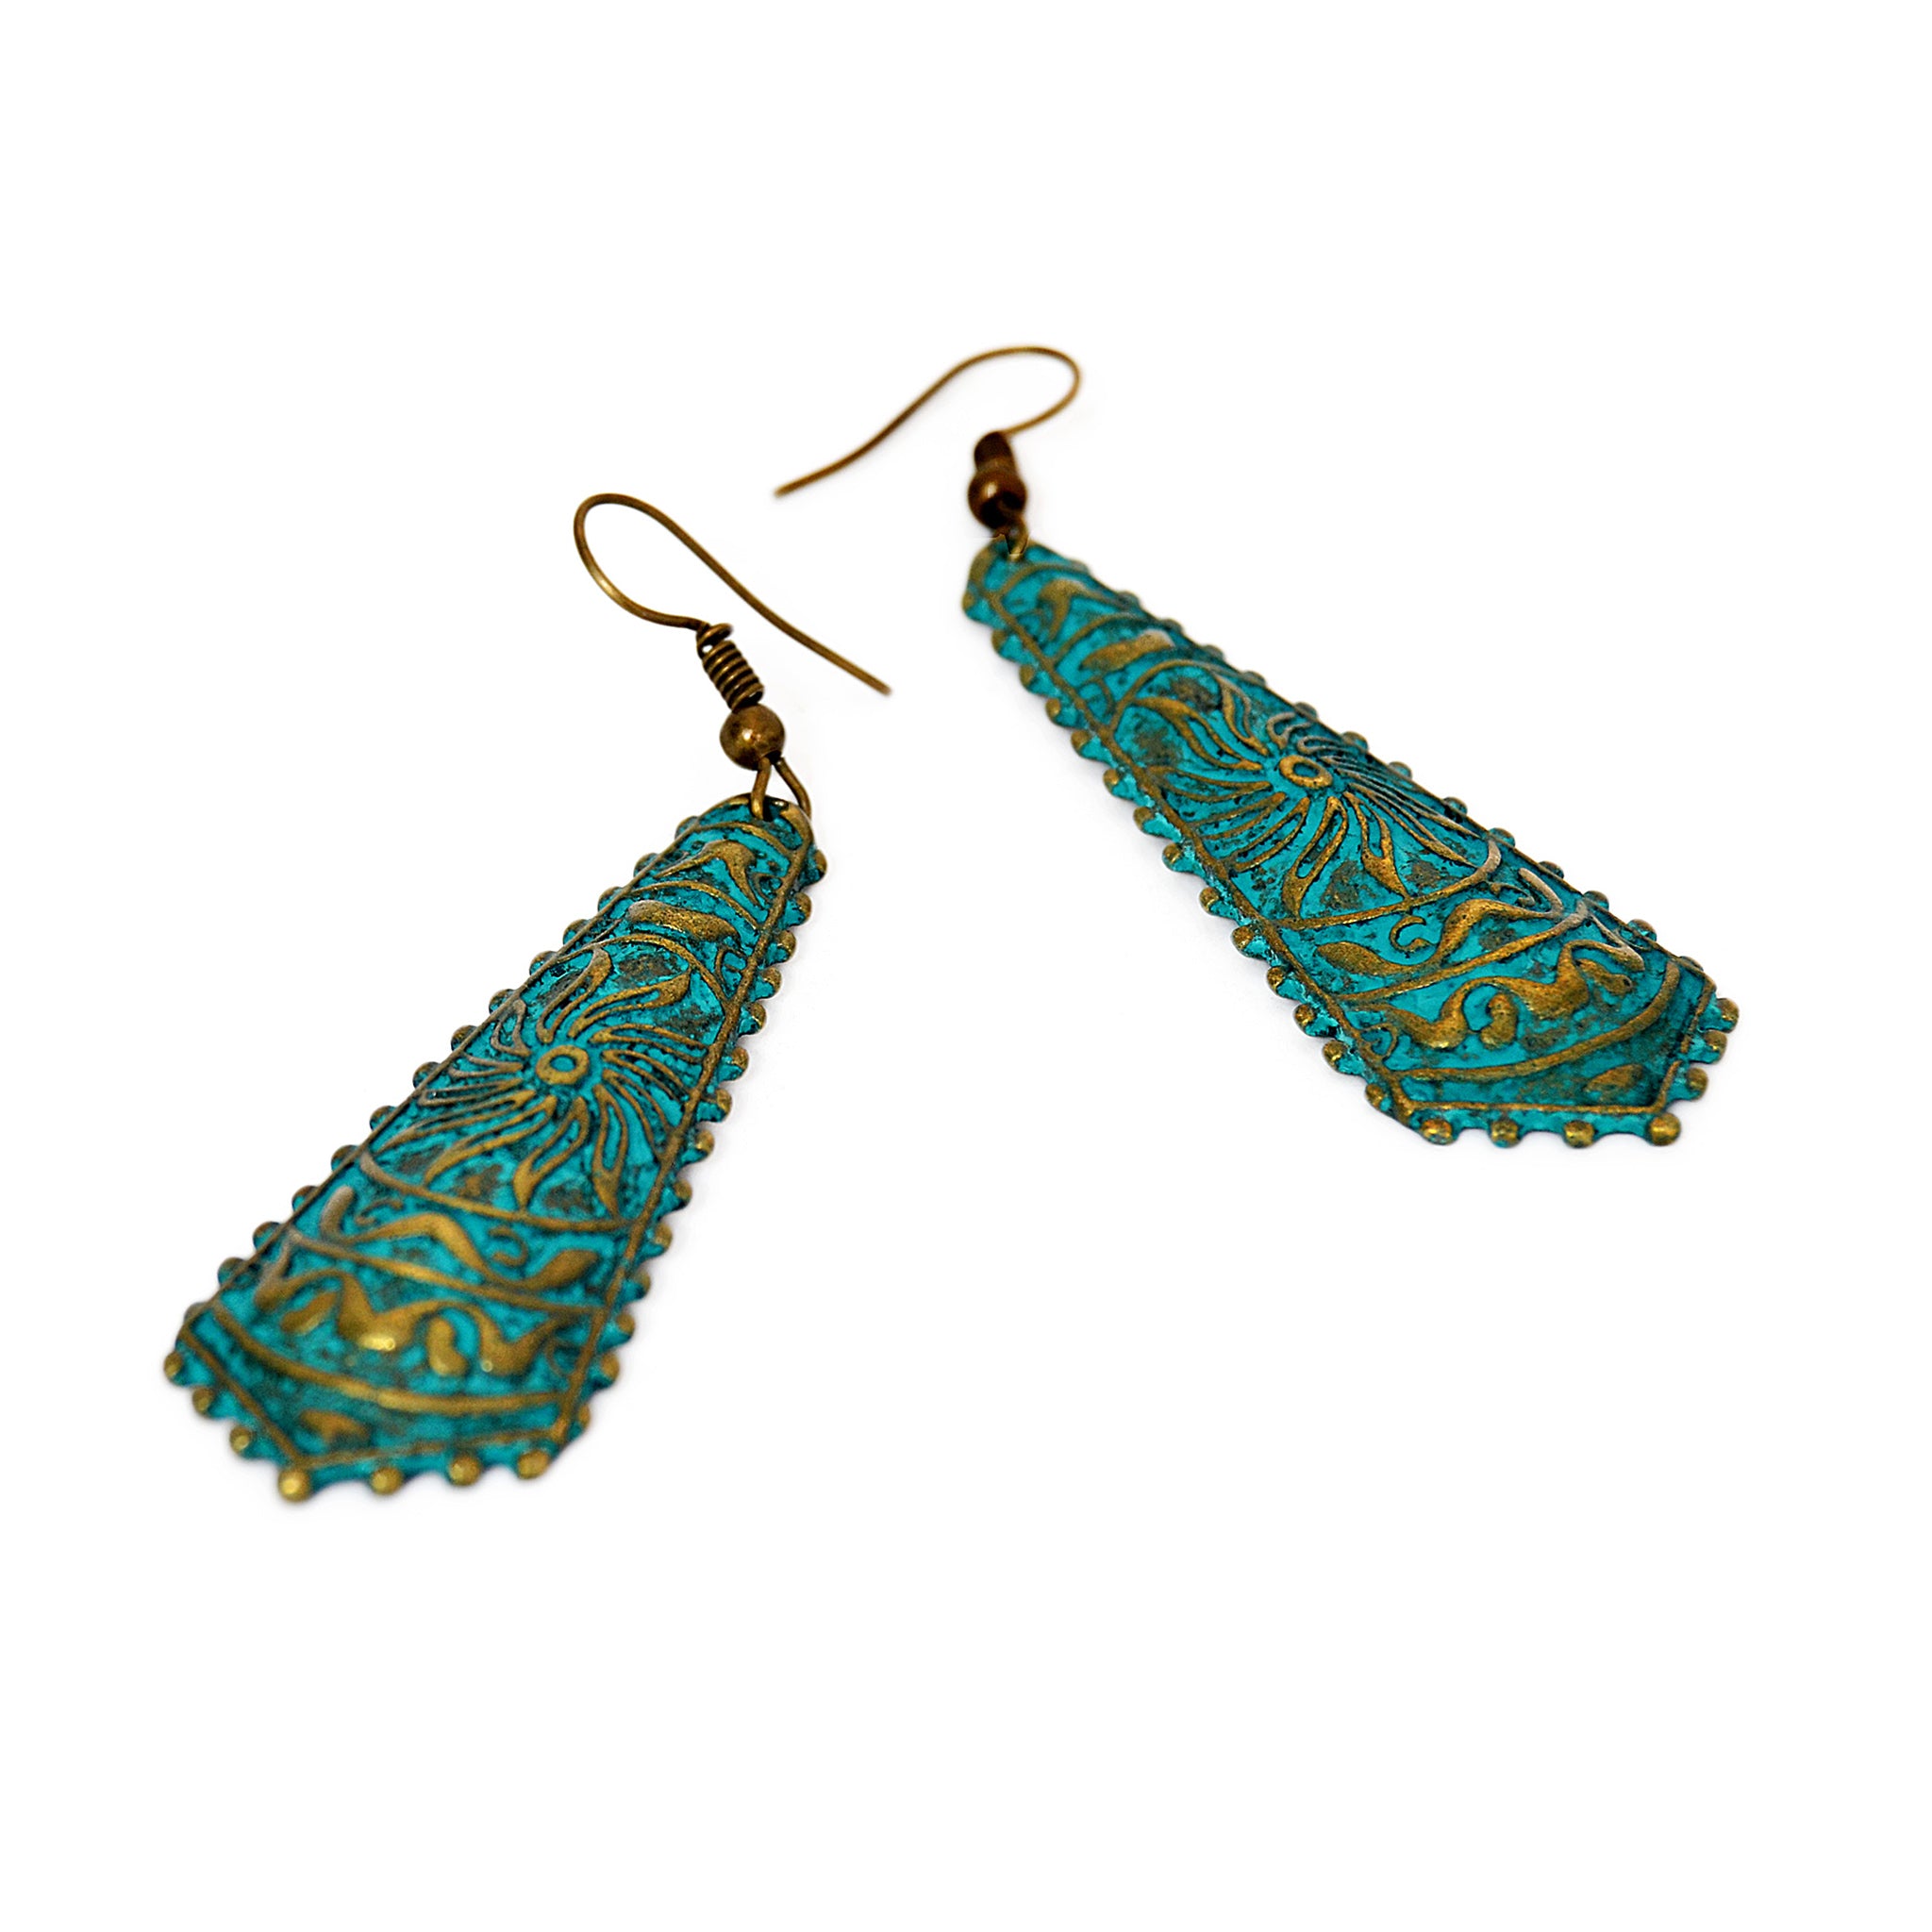 Drop hook earrings with engraved aztec design and blue green patina con brass